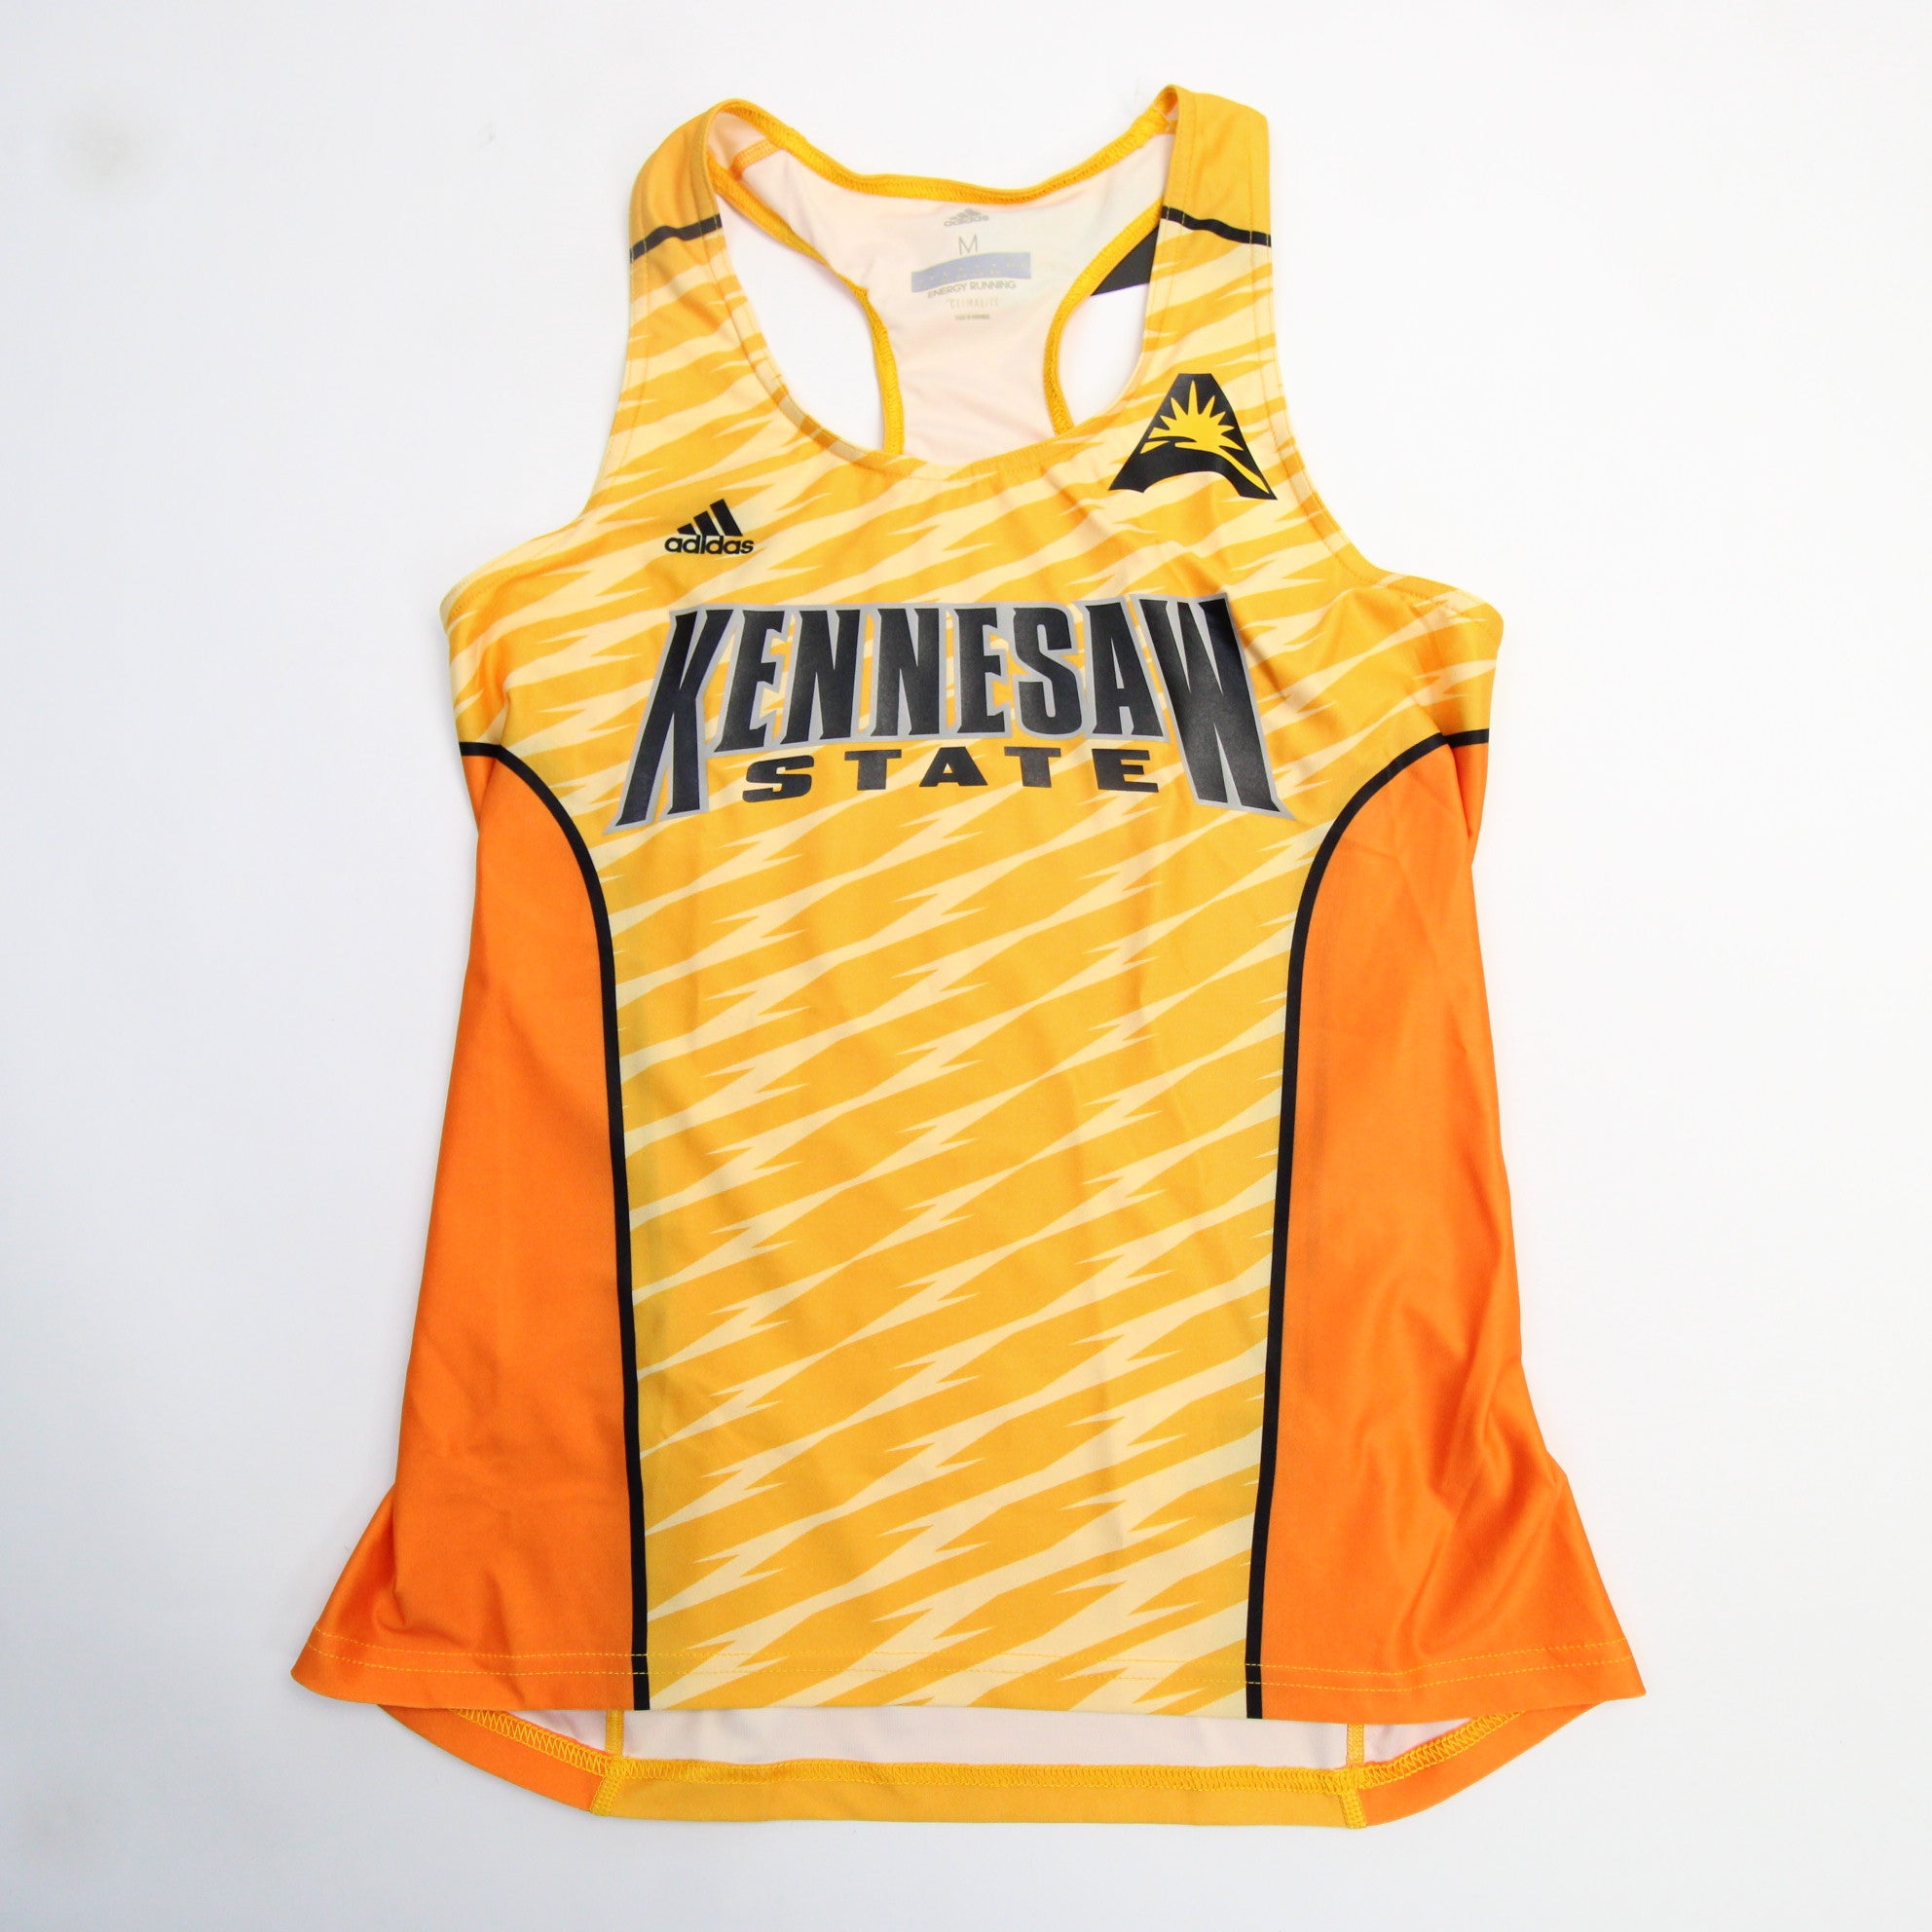 Kennesaw State Owls adidas Practice Jersey - Basketball Men's New